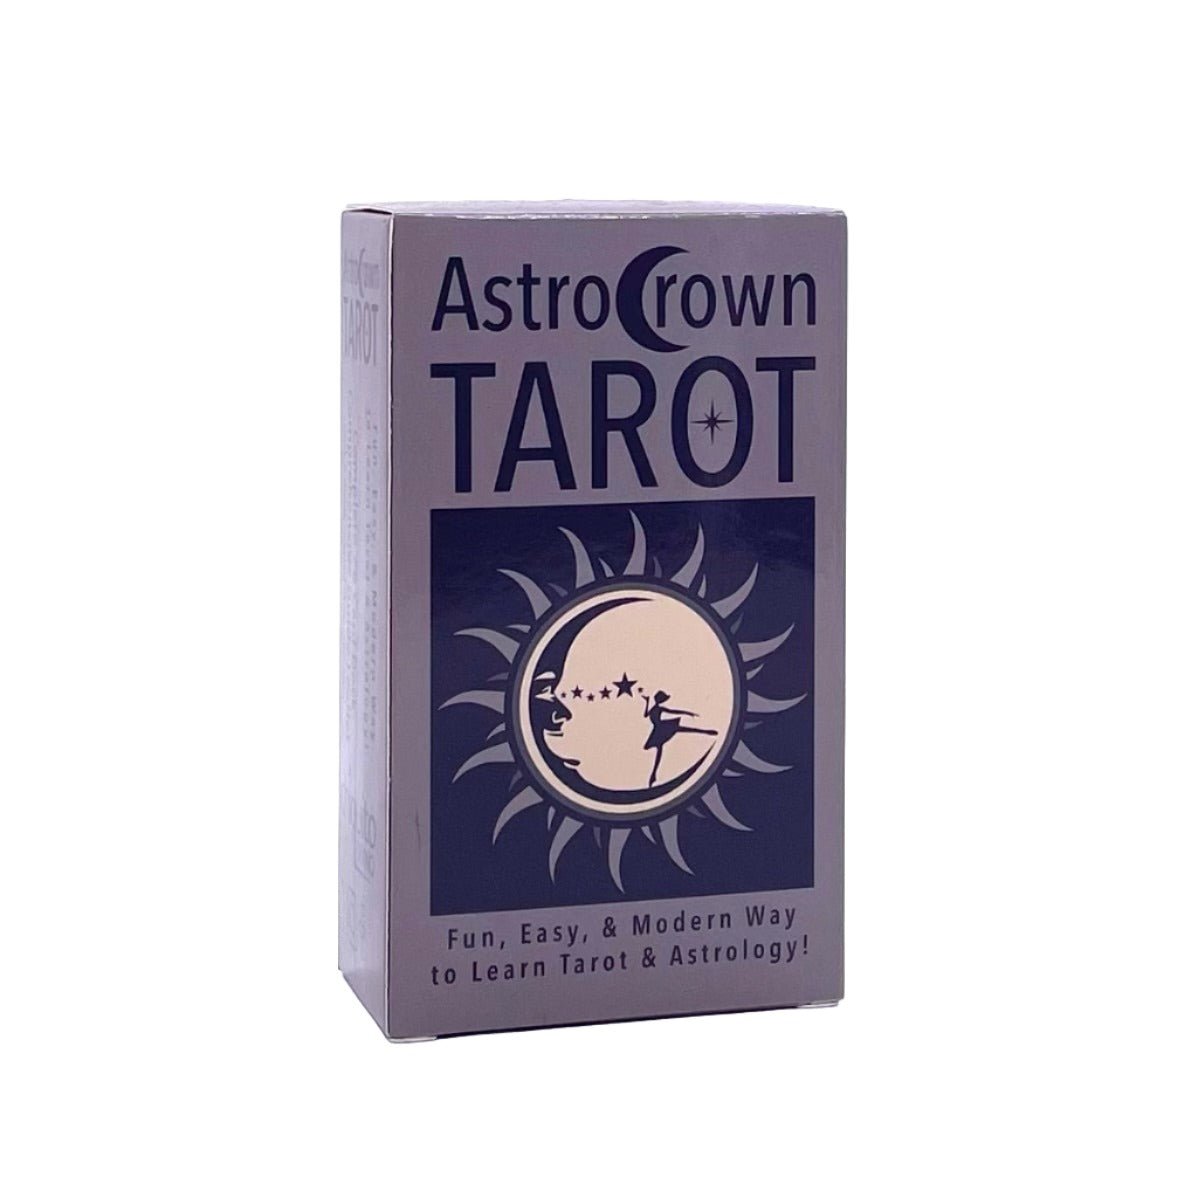 Box cover of the Astro Crown Tarot deck.